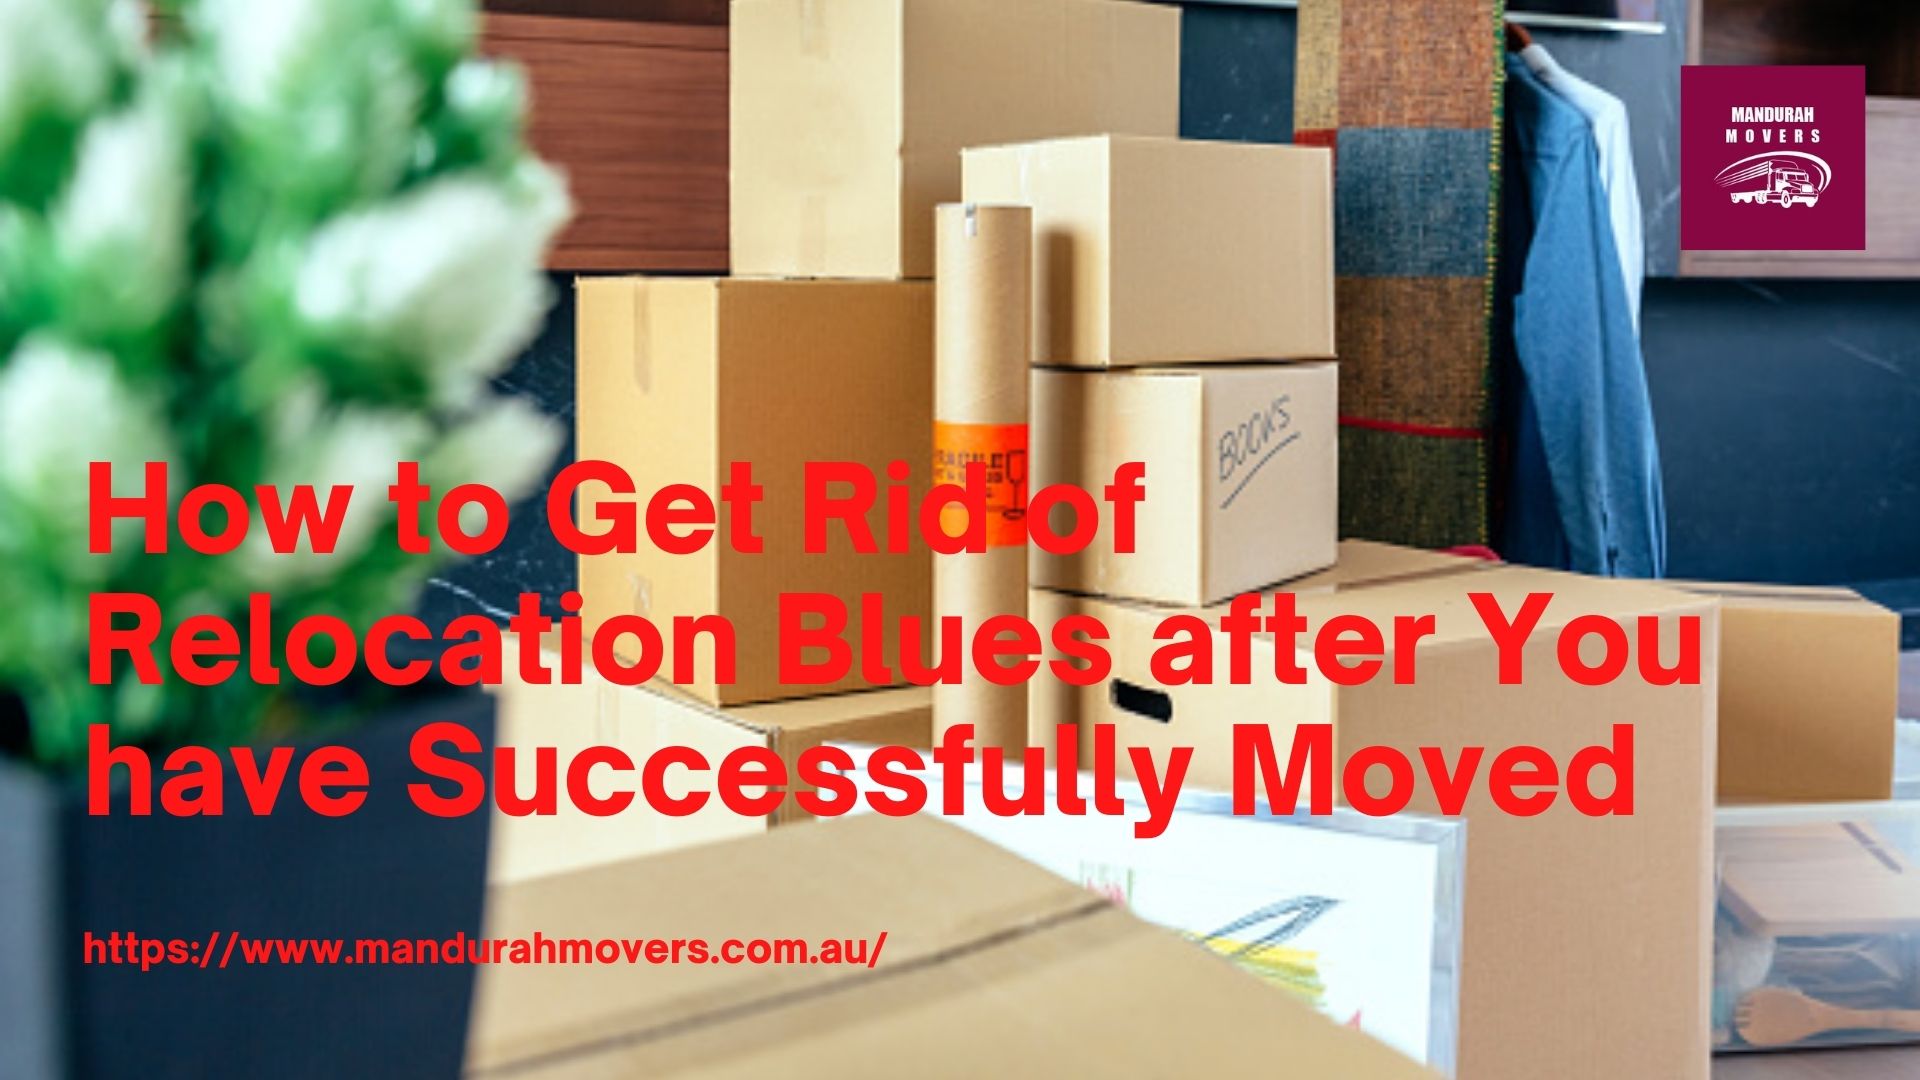 How to Get Rid of Relocation Blues after You have Successfully Moved